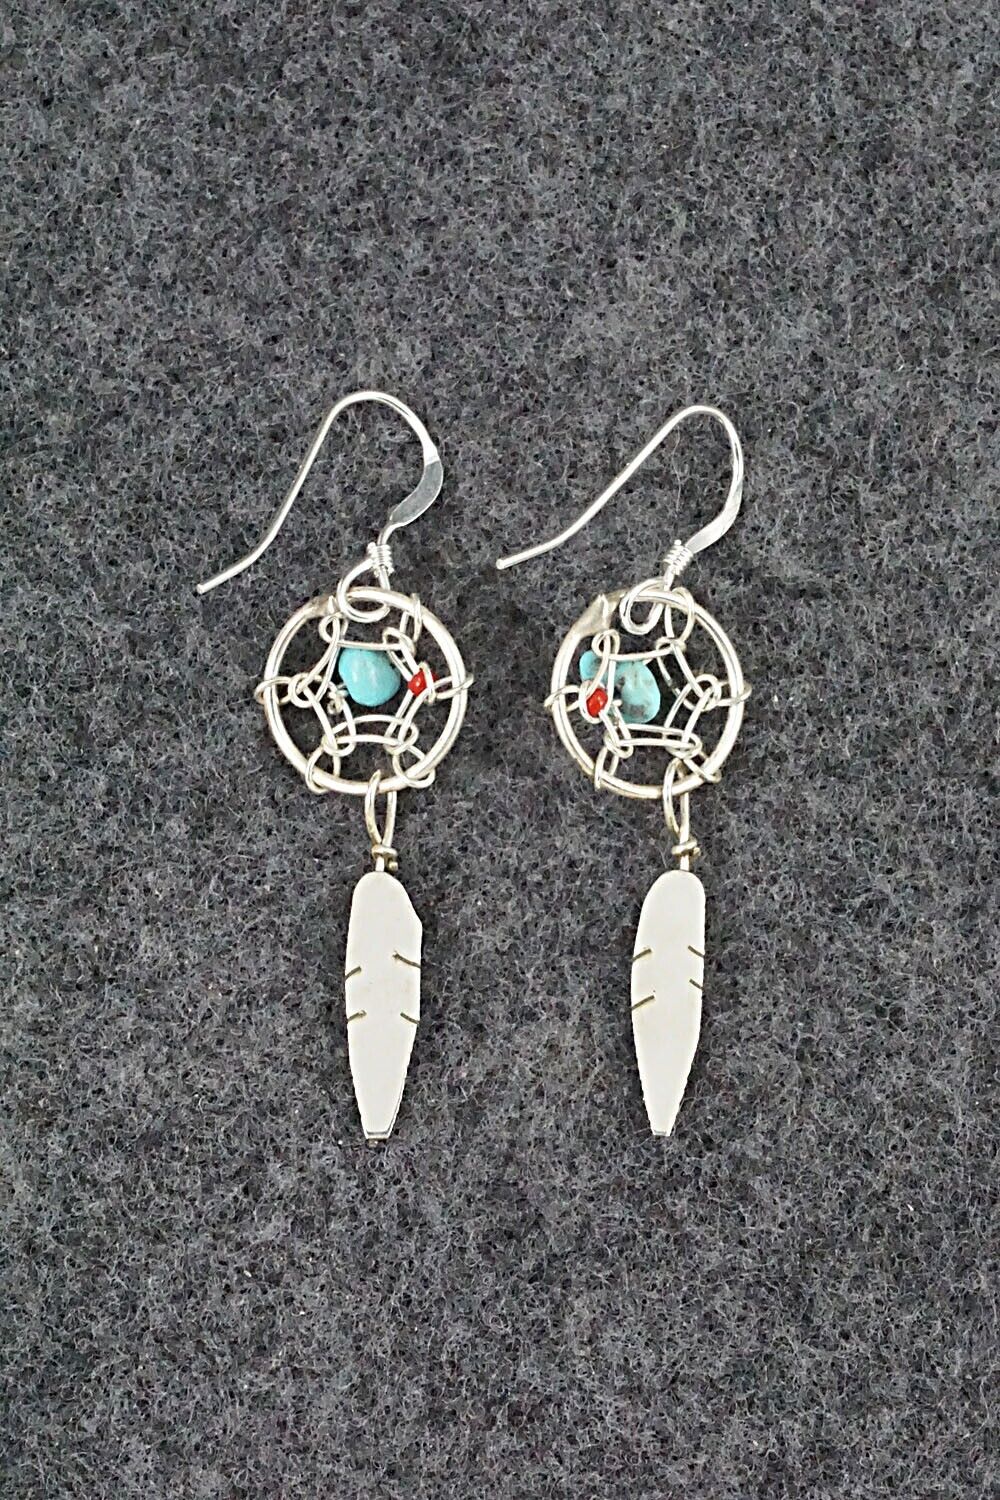 Turquoise, Coral & Sterling Silver Earrings - Lorenzo Arviso Jr.